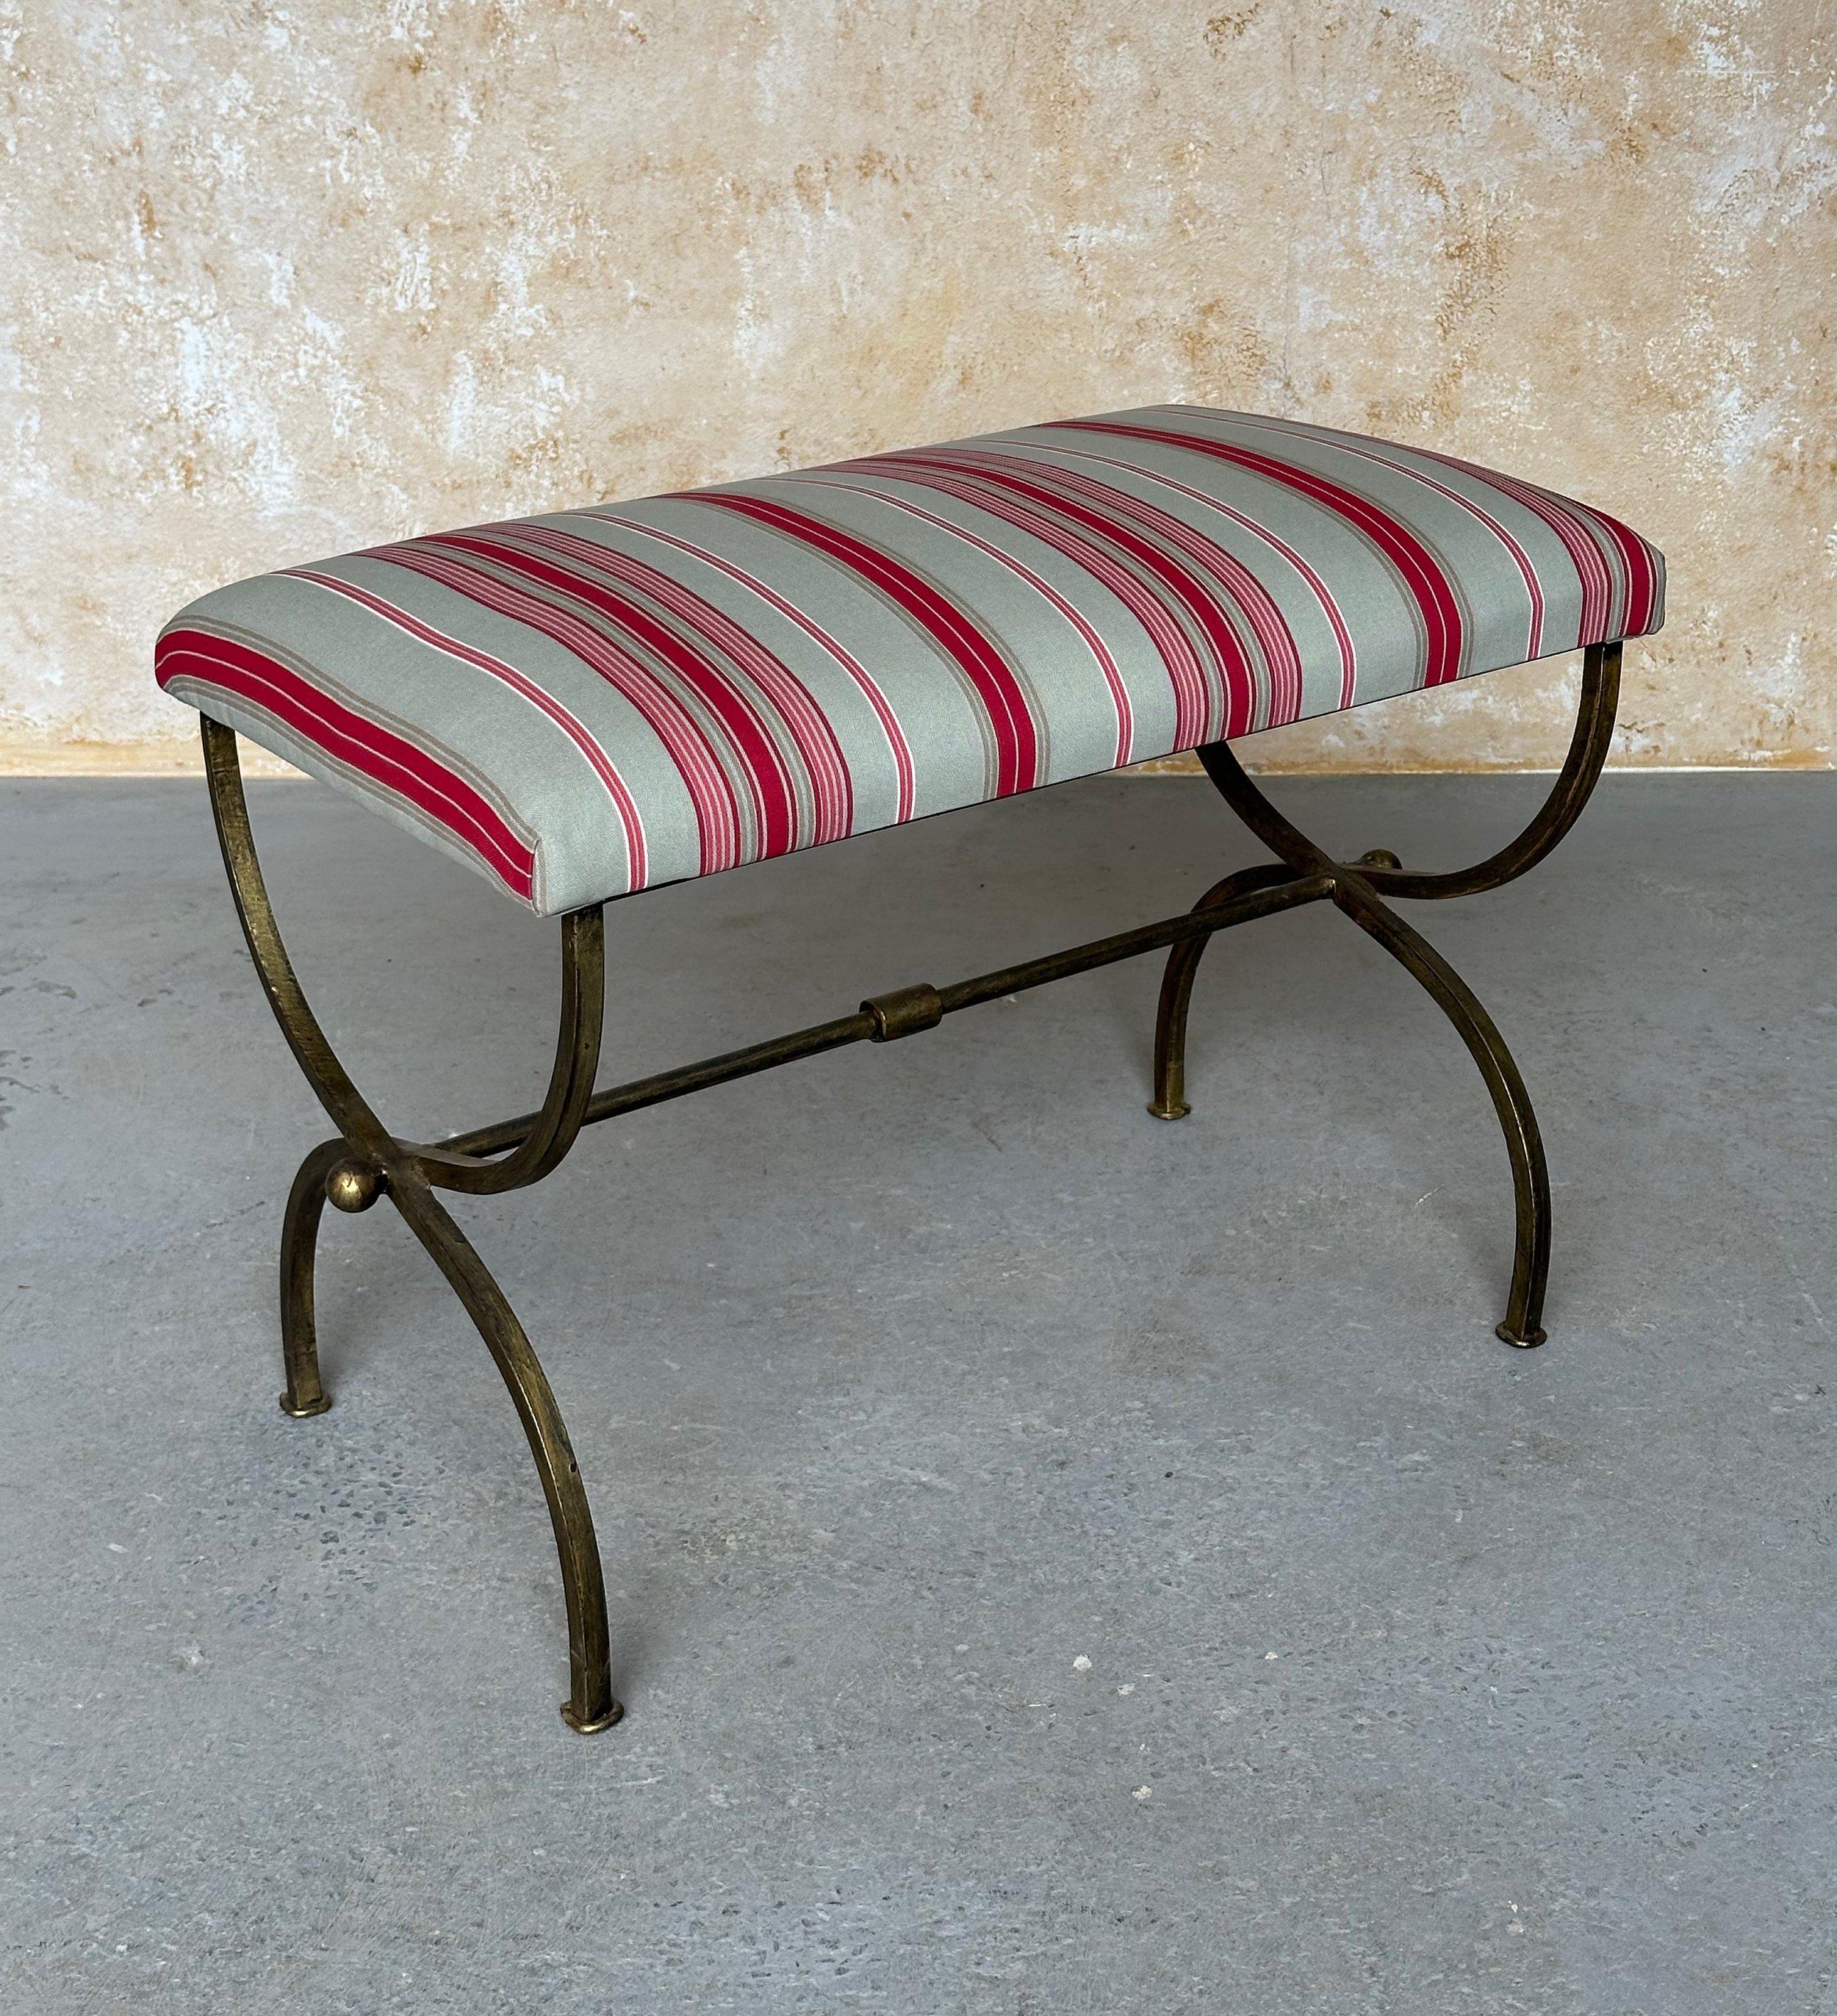 This elegant Spanish iron bench was recently made by skilled European craftsmen using traditional iron working techniques. It features gracefully curved legs and a central stretcher with a decorative central ring detail and spheres at the ends. The